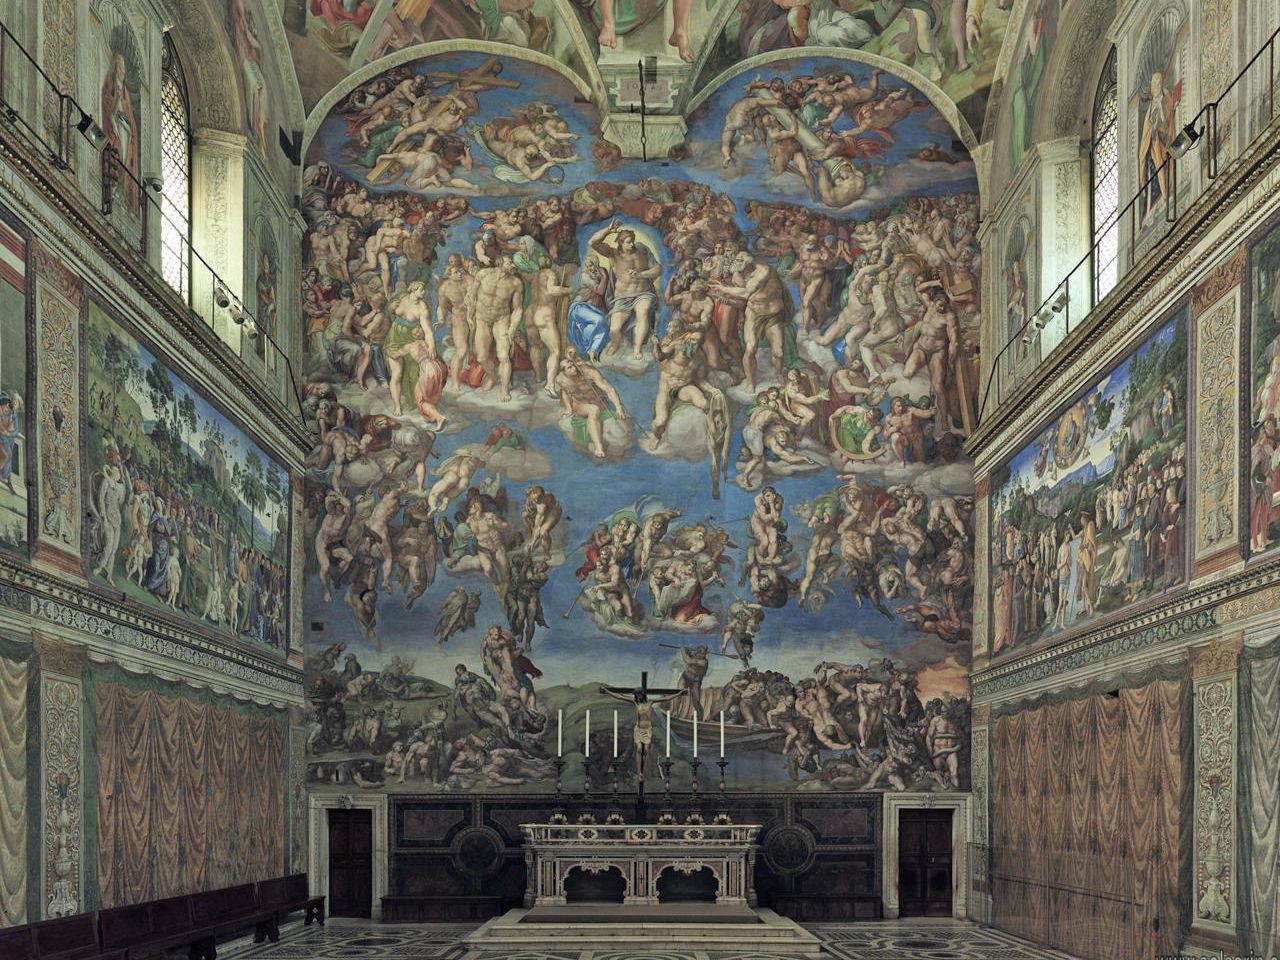 what is the overall theme of the sistine chapel paintings?